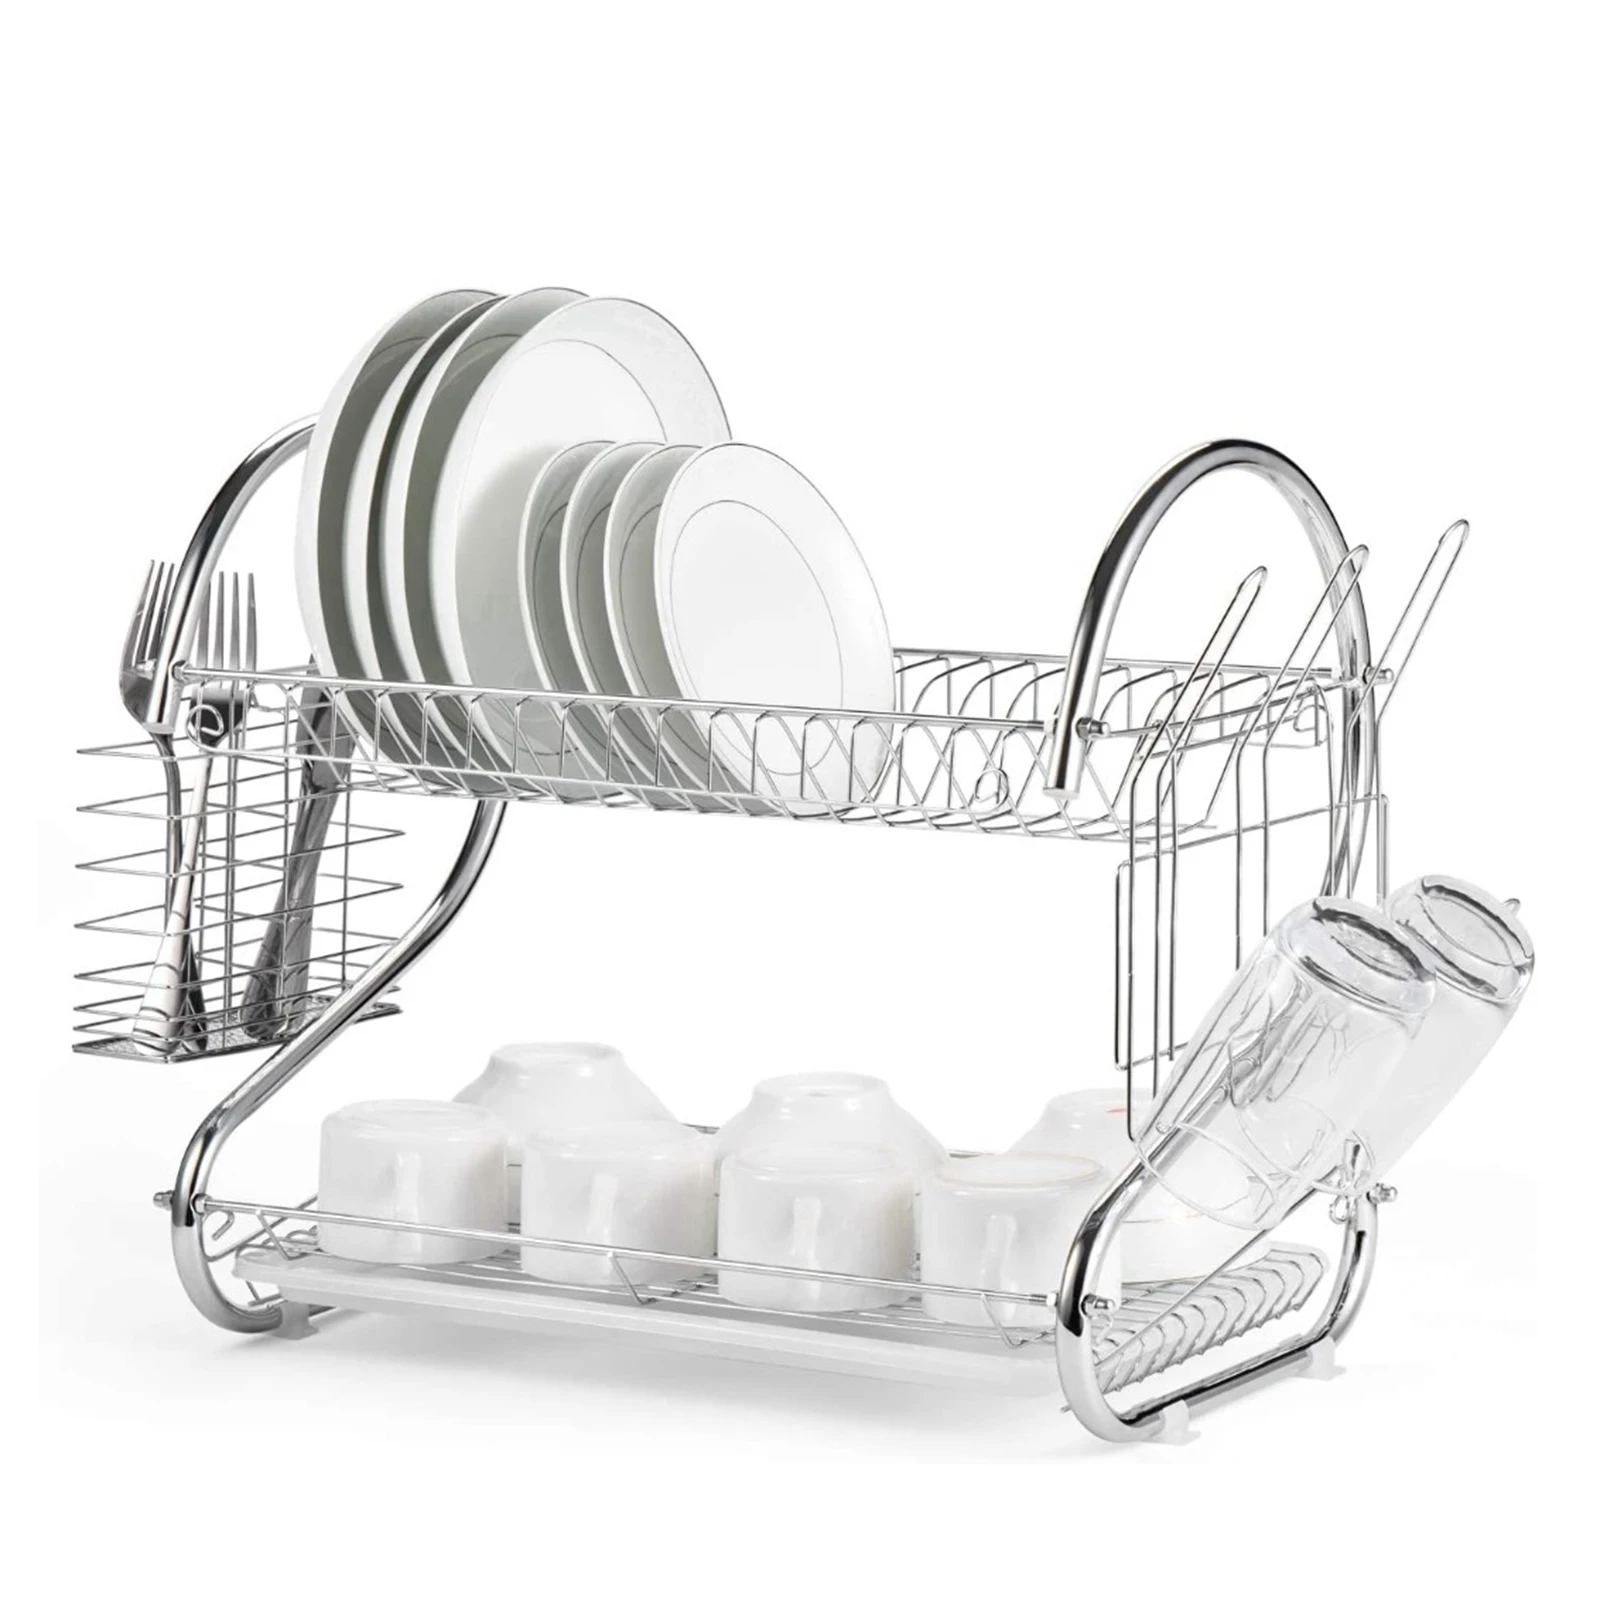 Dish Drying Rack, 2 Tier Dish Rack with Utensil Holder, Cup Holder and Dish Drainer for Kitchen Counter Top Dish Dryer Silver